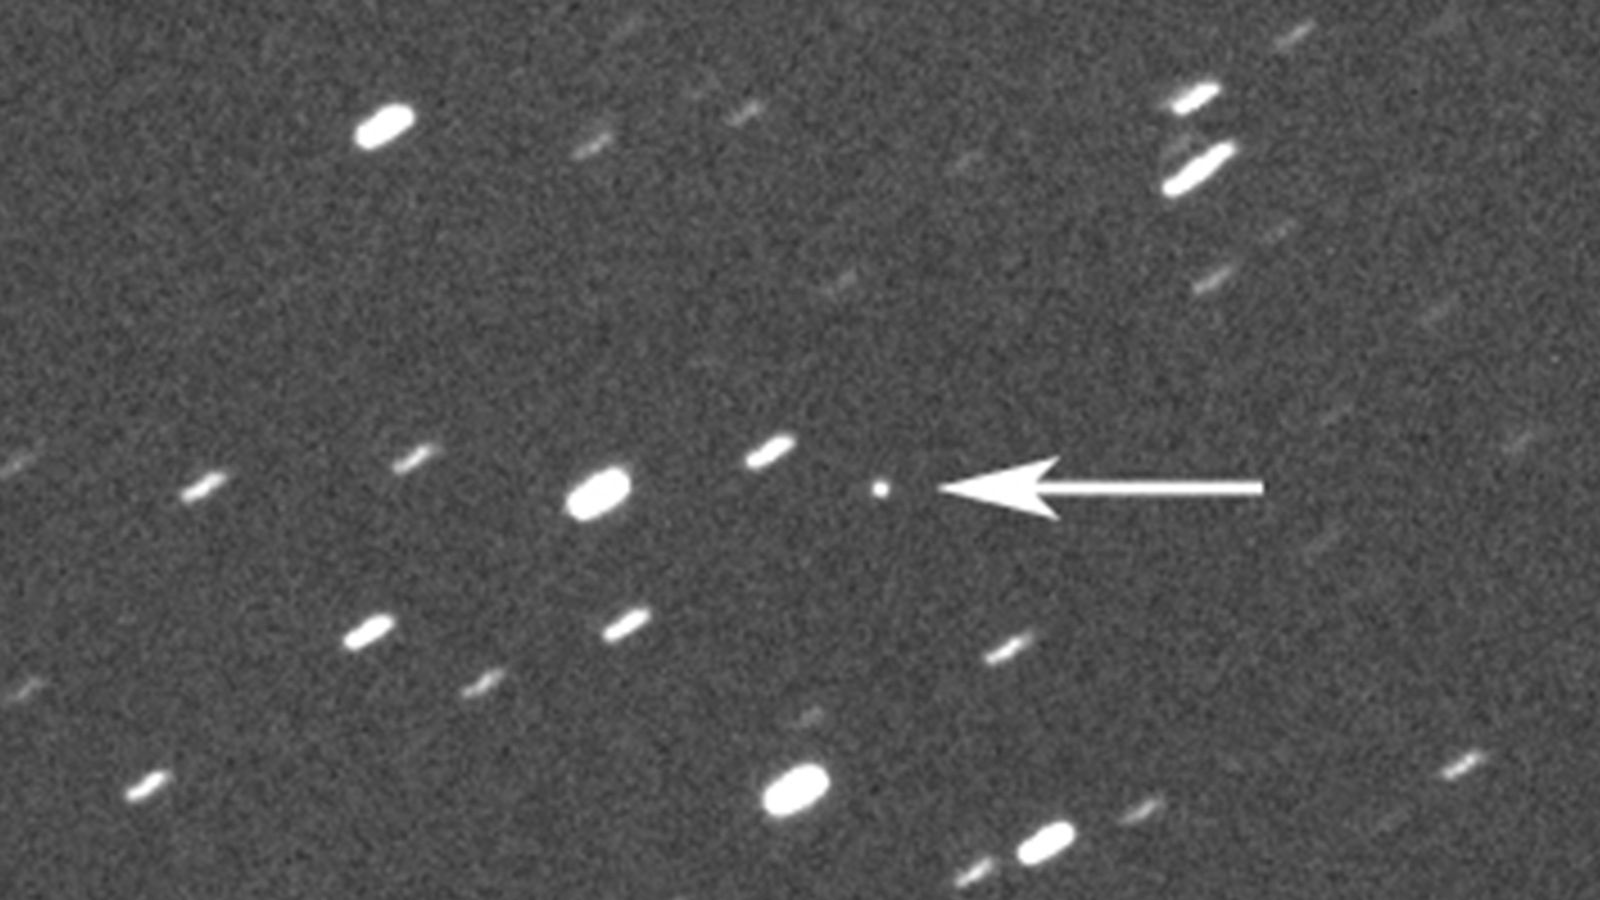 Asteroid to pass between Earth and moon in 17,500mph close encounter